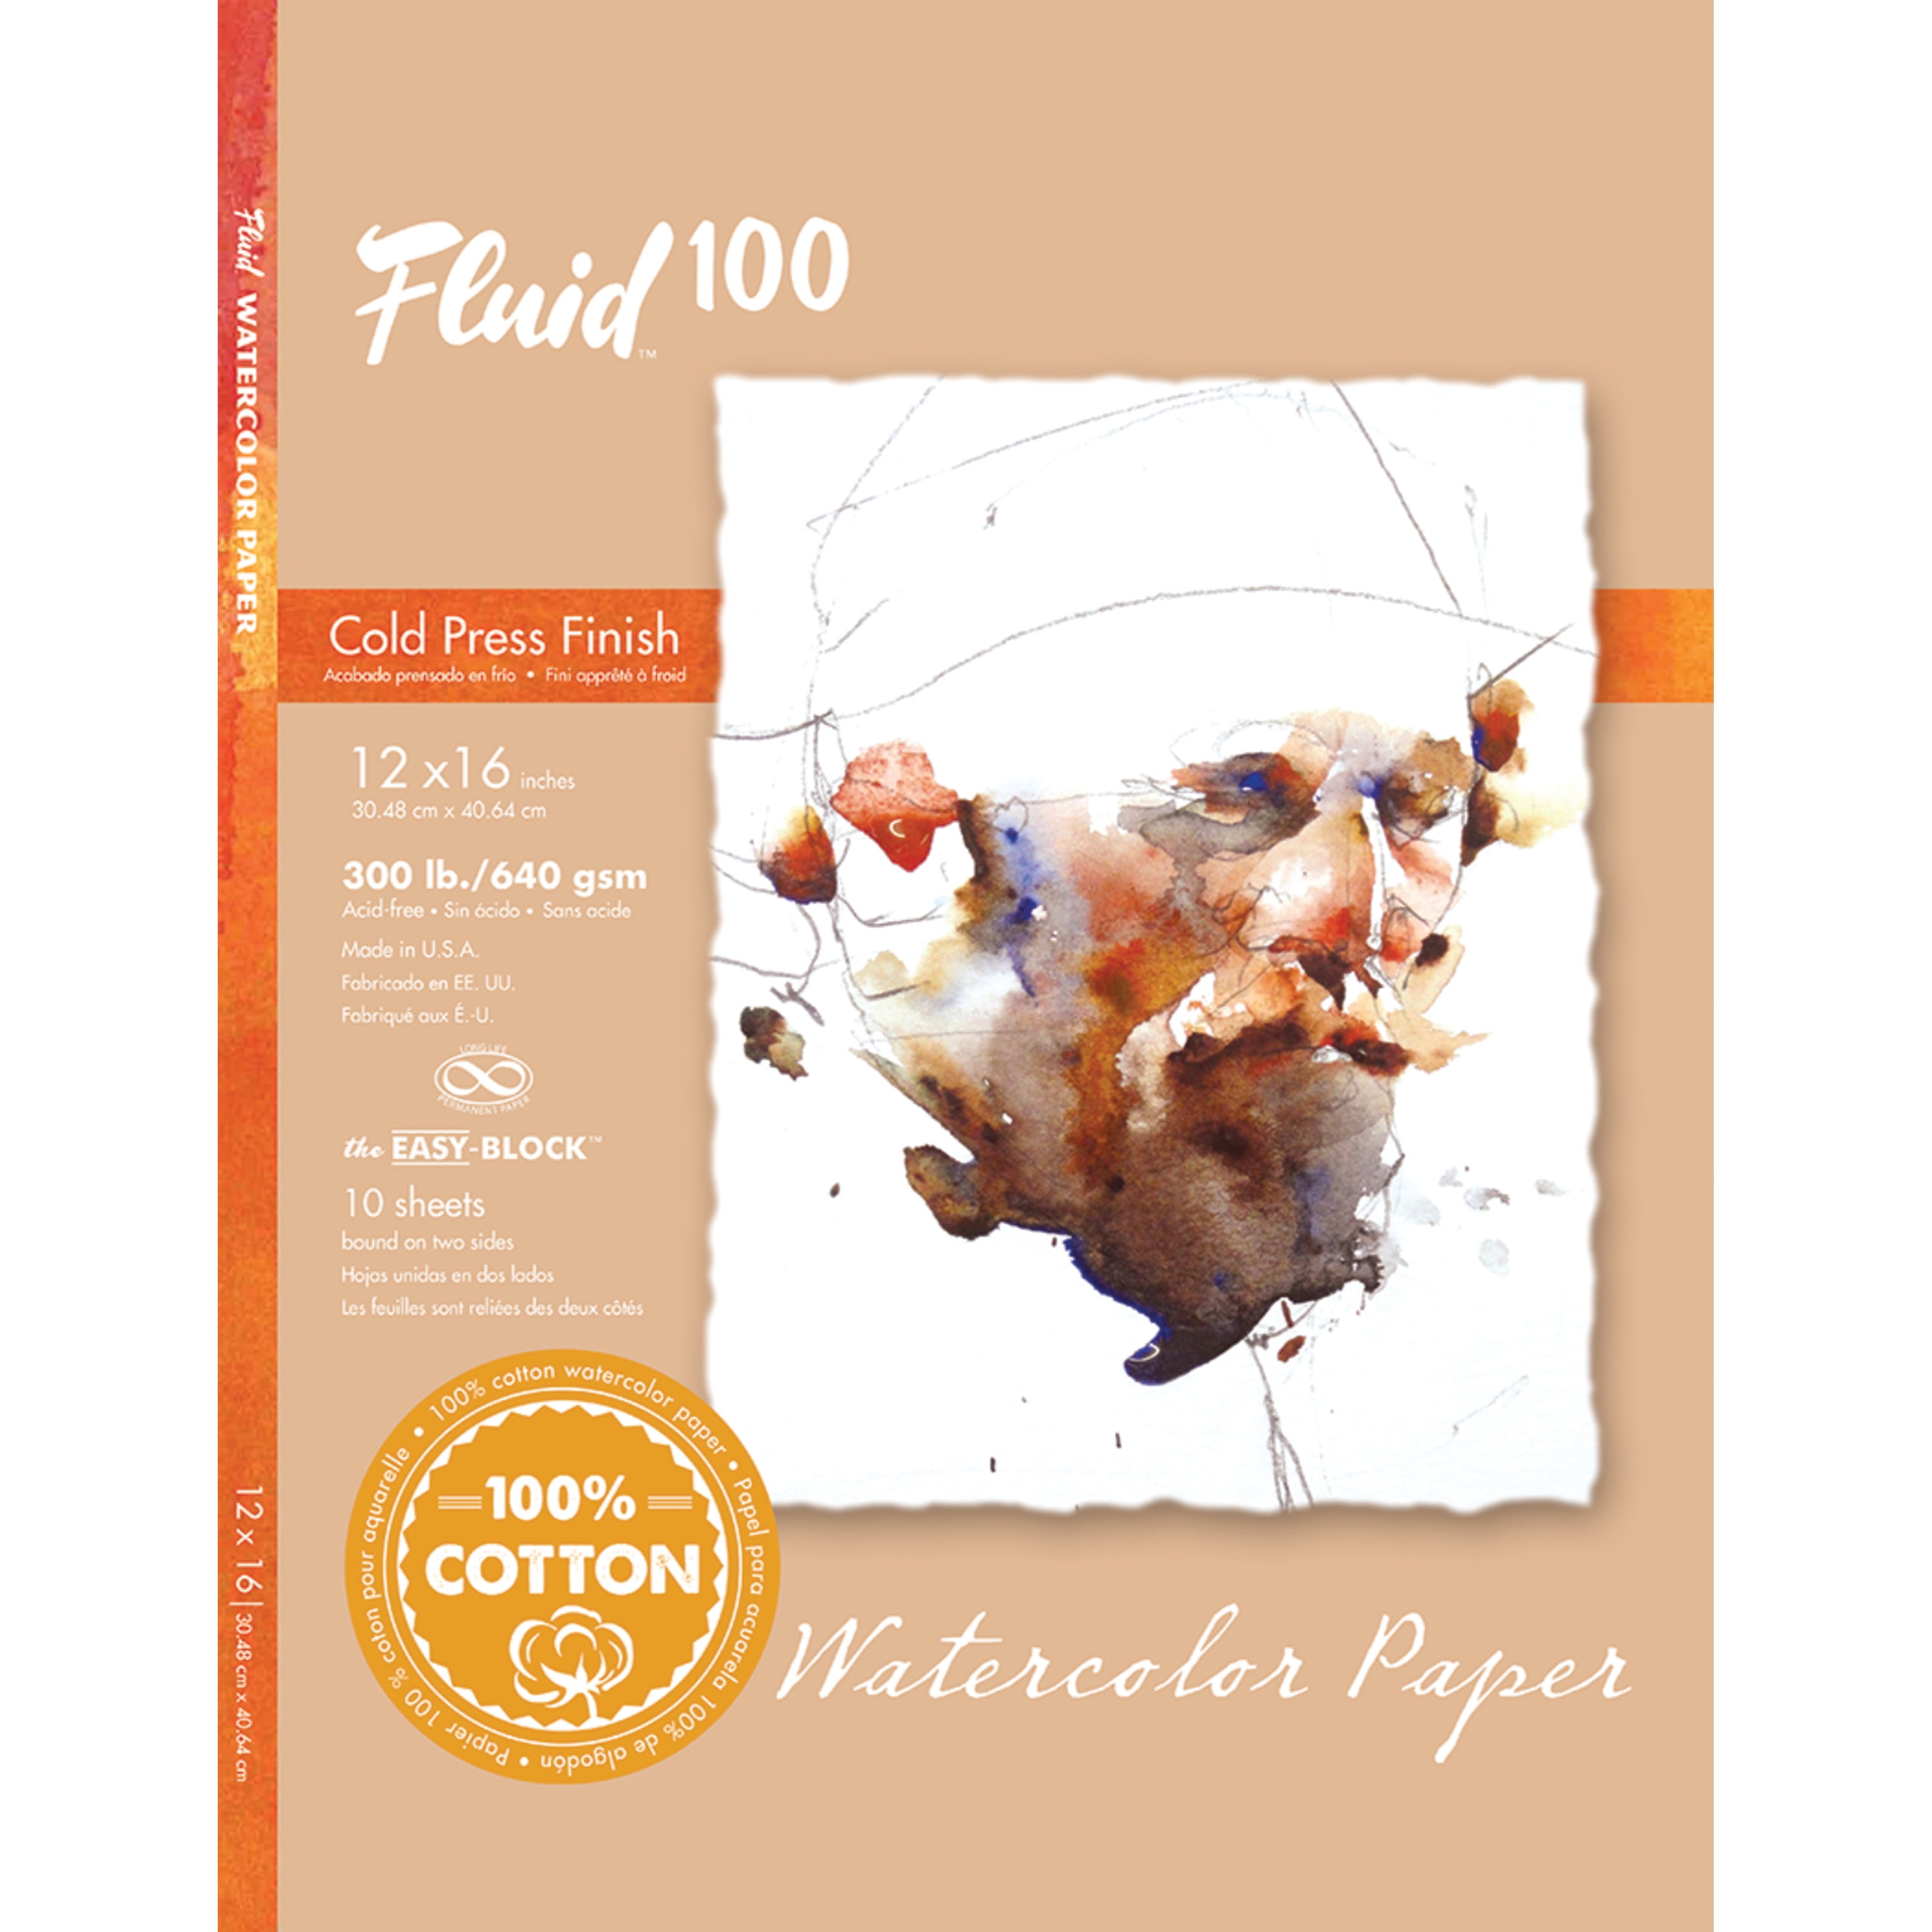 Canson XL Series Bristol Paper, Smooth, Foldover Pad, 9x12 inches